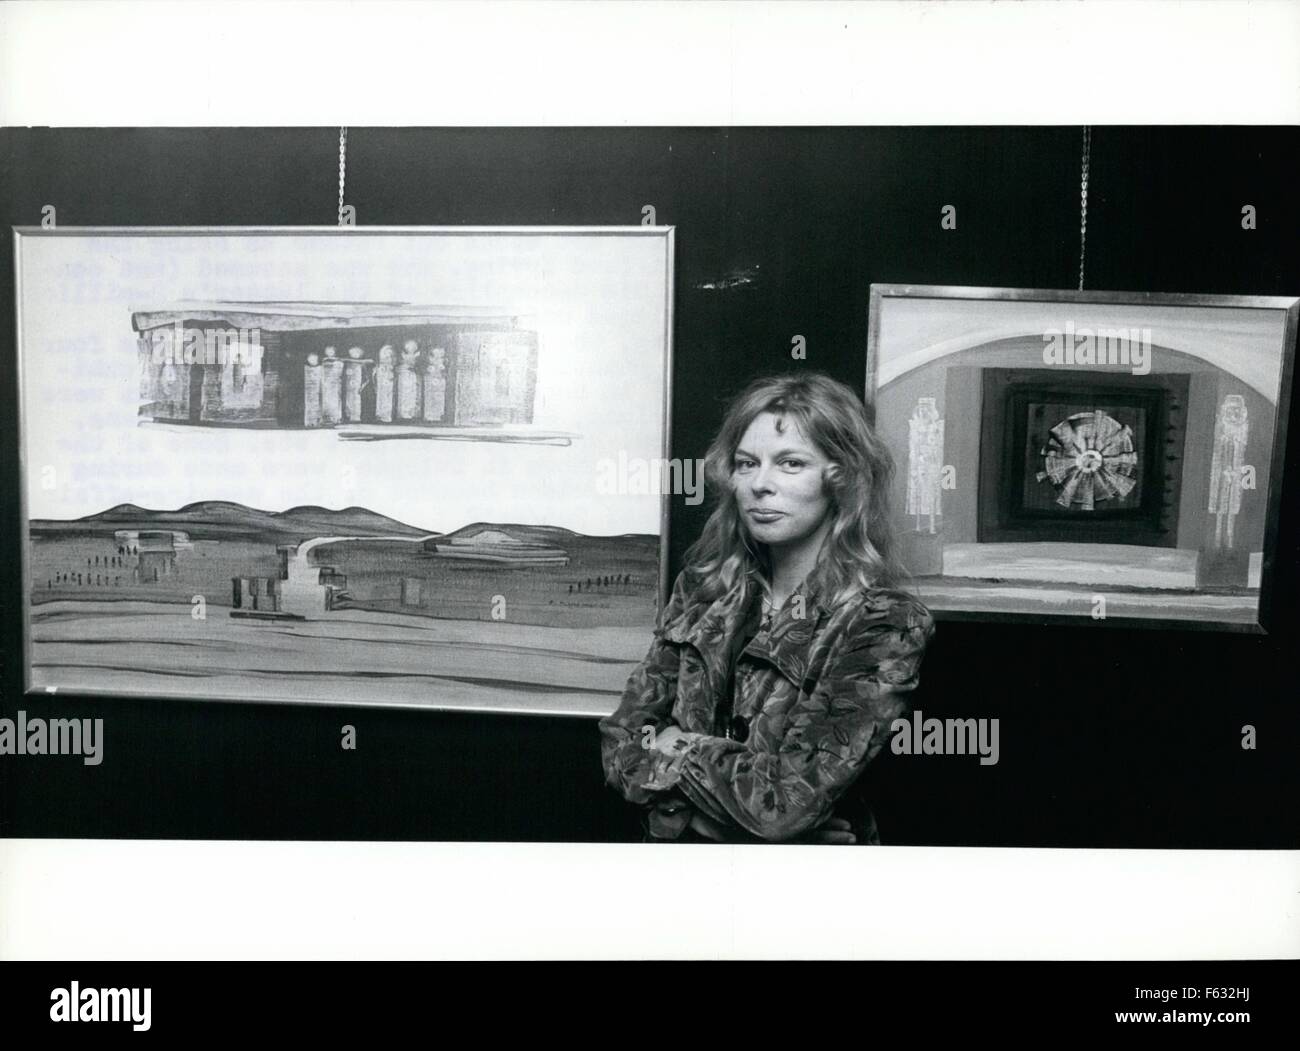 1972 - Edith Sommer-Irving shows her paintings in Cologne: ''Romantical phantasies'' calls Edith Sommer-Irving her paintings, which she presently shows in Cologne (picture). Edith Irving's name was in every paper four years ago., not regarding to her art works but rather as being the wife of writer Clifford Irving. She was accused (and condemned) for being his accomplice of the latter's 2-million cheat with the alleged memoirs of Howard Hughes. Edith Sommer-Irving, who was born in Germany and has four children, started painting 18 years ago, her first exhibition was in 1959 in Germany. After t Stock Photo